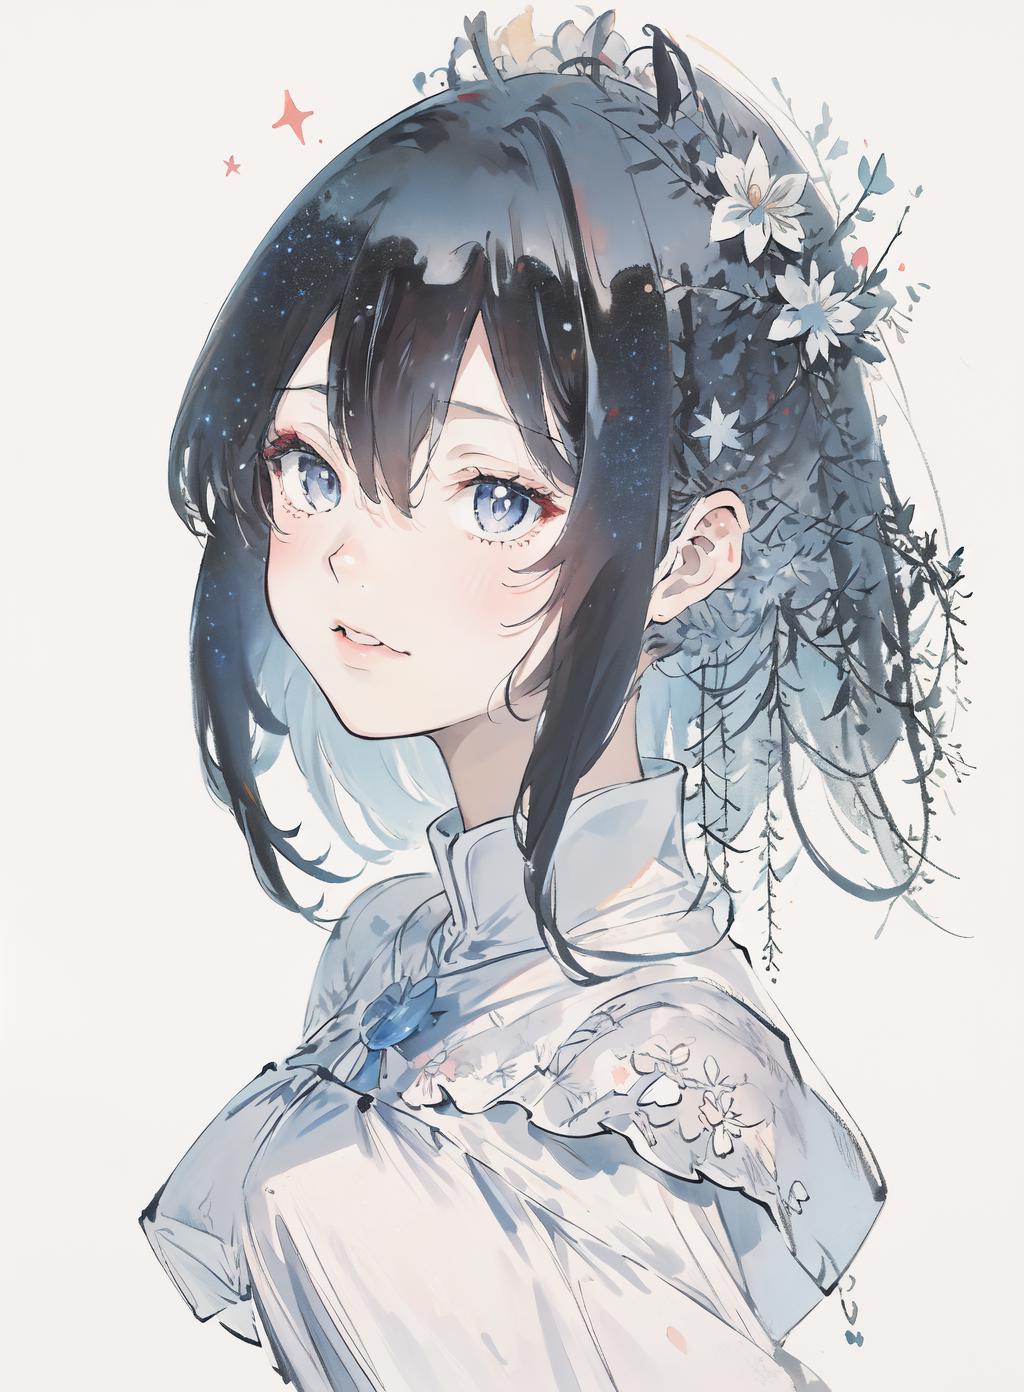 A cartoon girl with blue eyes and a white dress.